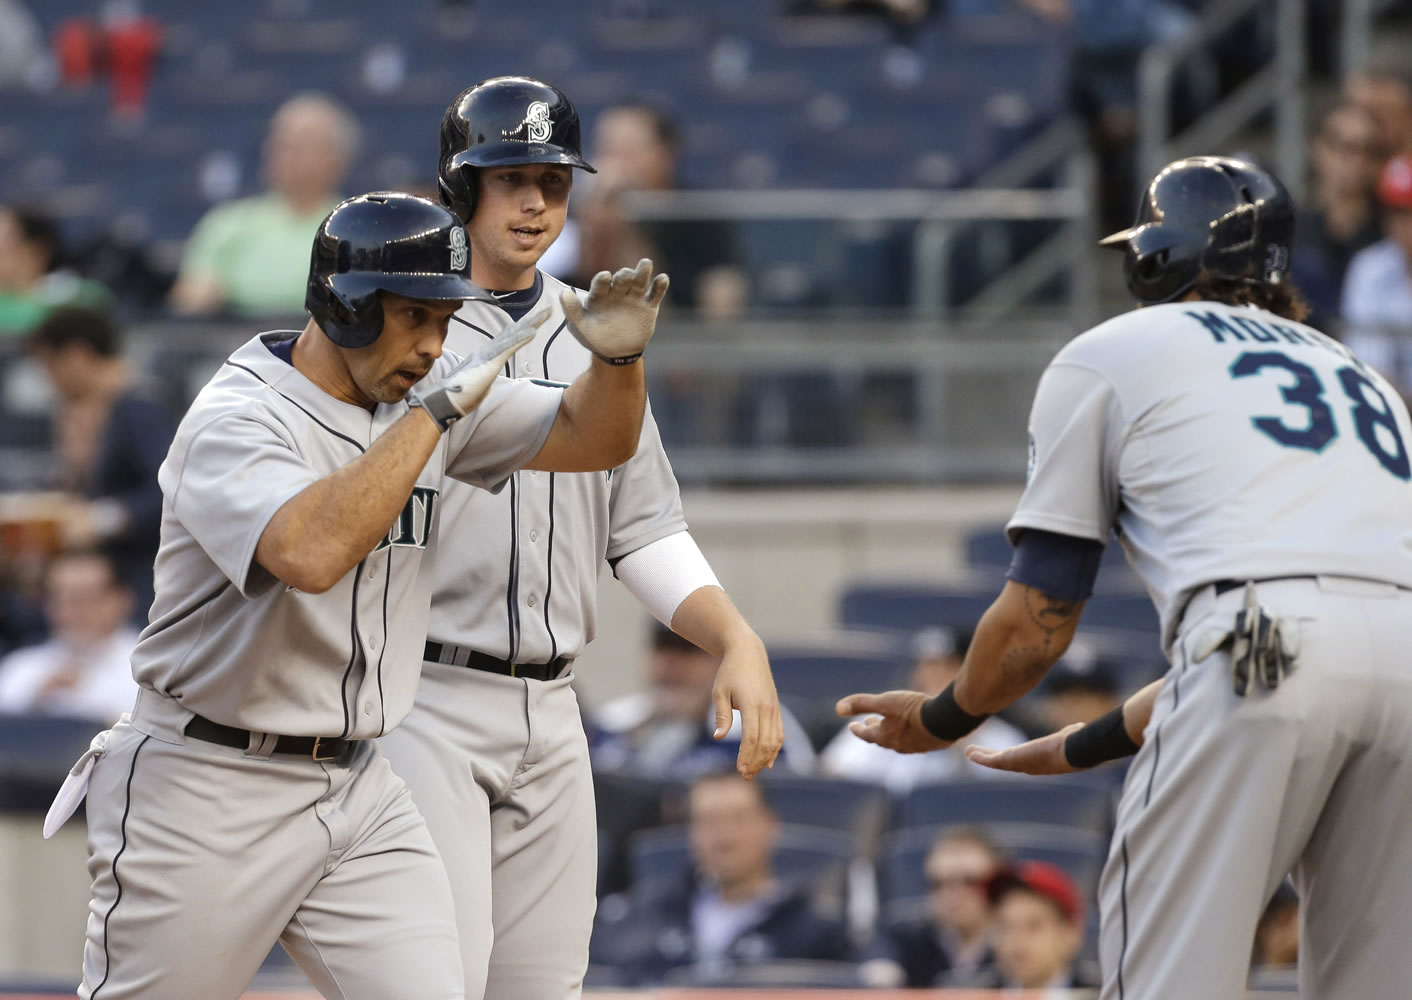 Seattle Mariners' Raul Ibanez, left, is congratulated by Michael Morse, right, after hitting a grand slam off New York Yankees starting pitcher Phil Hughes during the first inning of a baseball game at Yankee Stadium in New York, Wednesday, May 15, 2013.